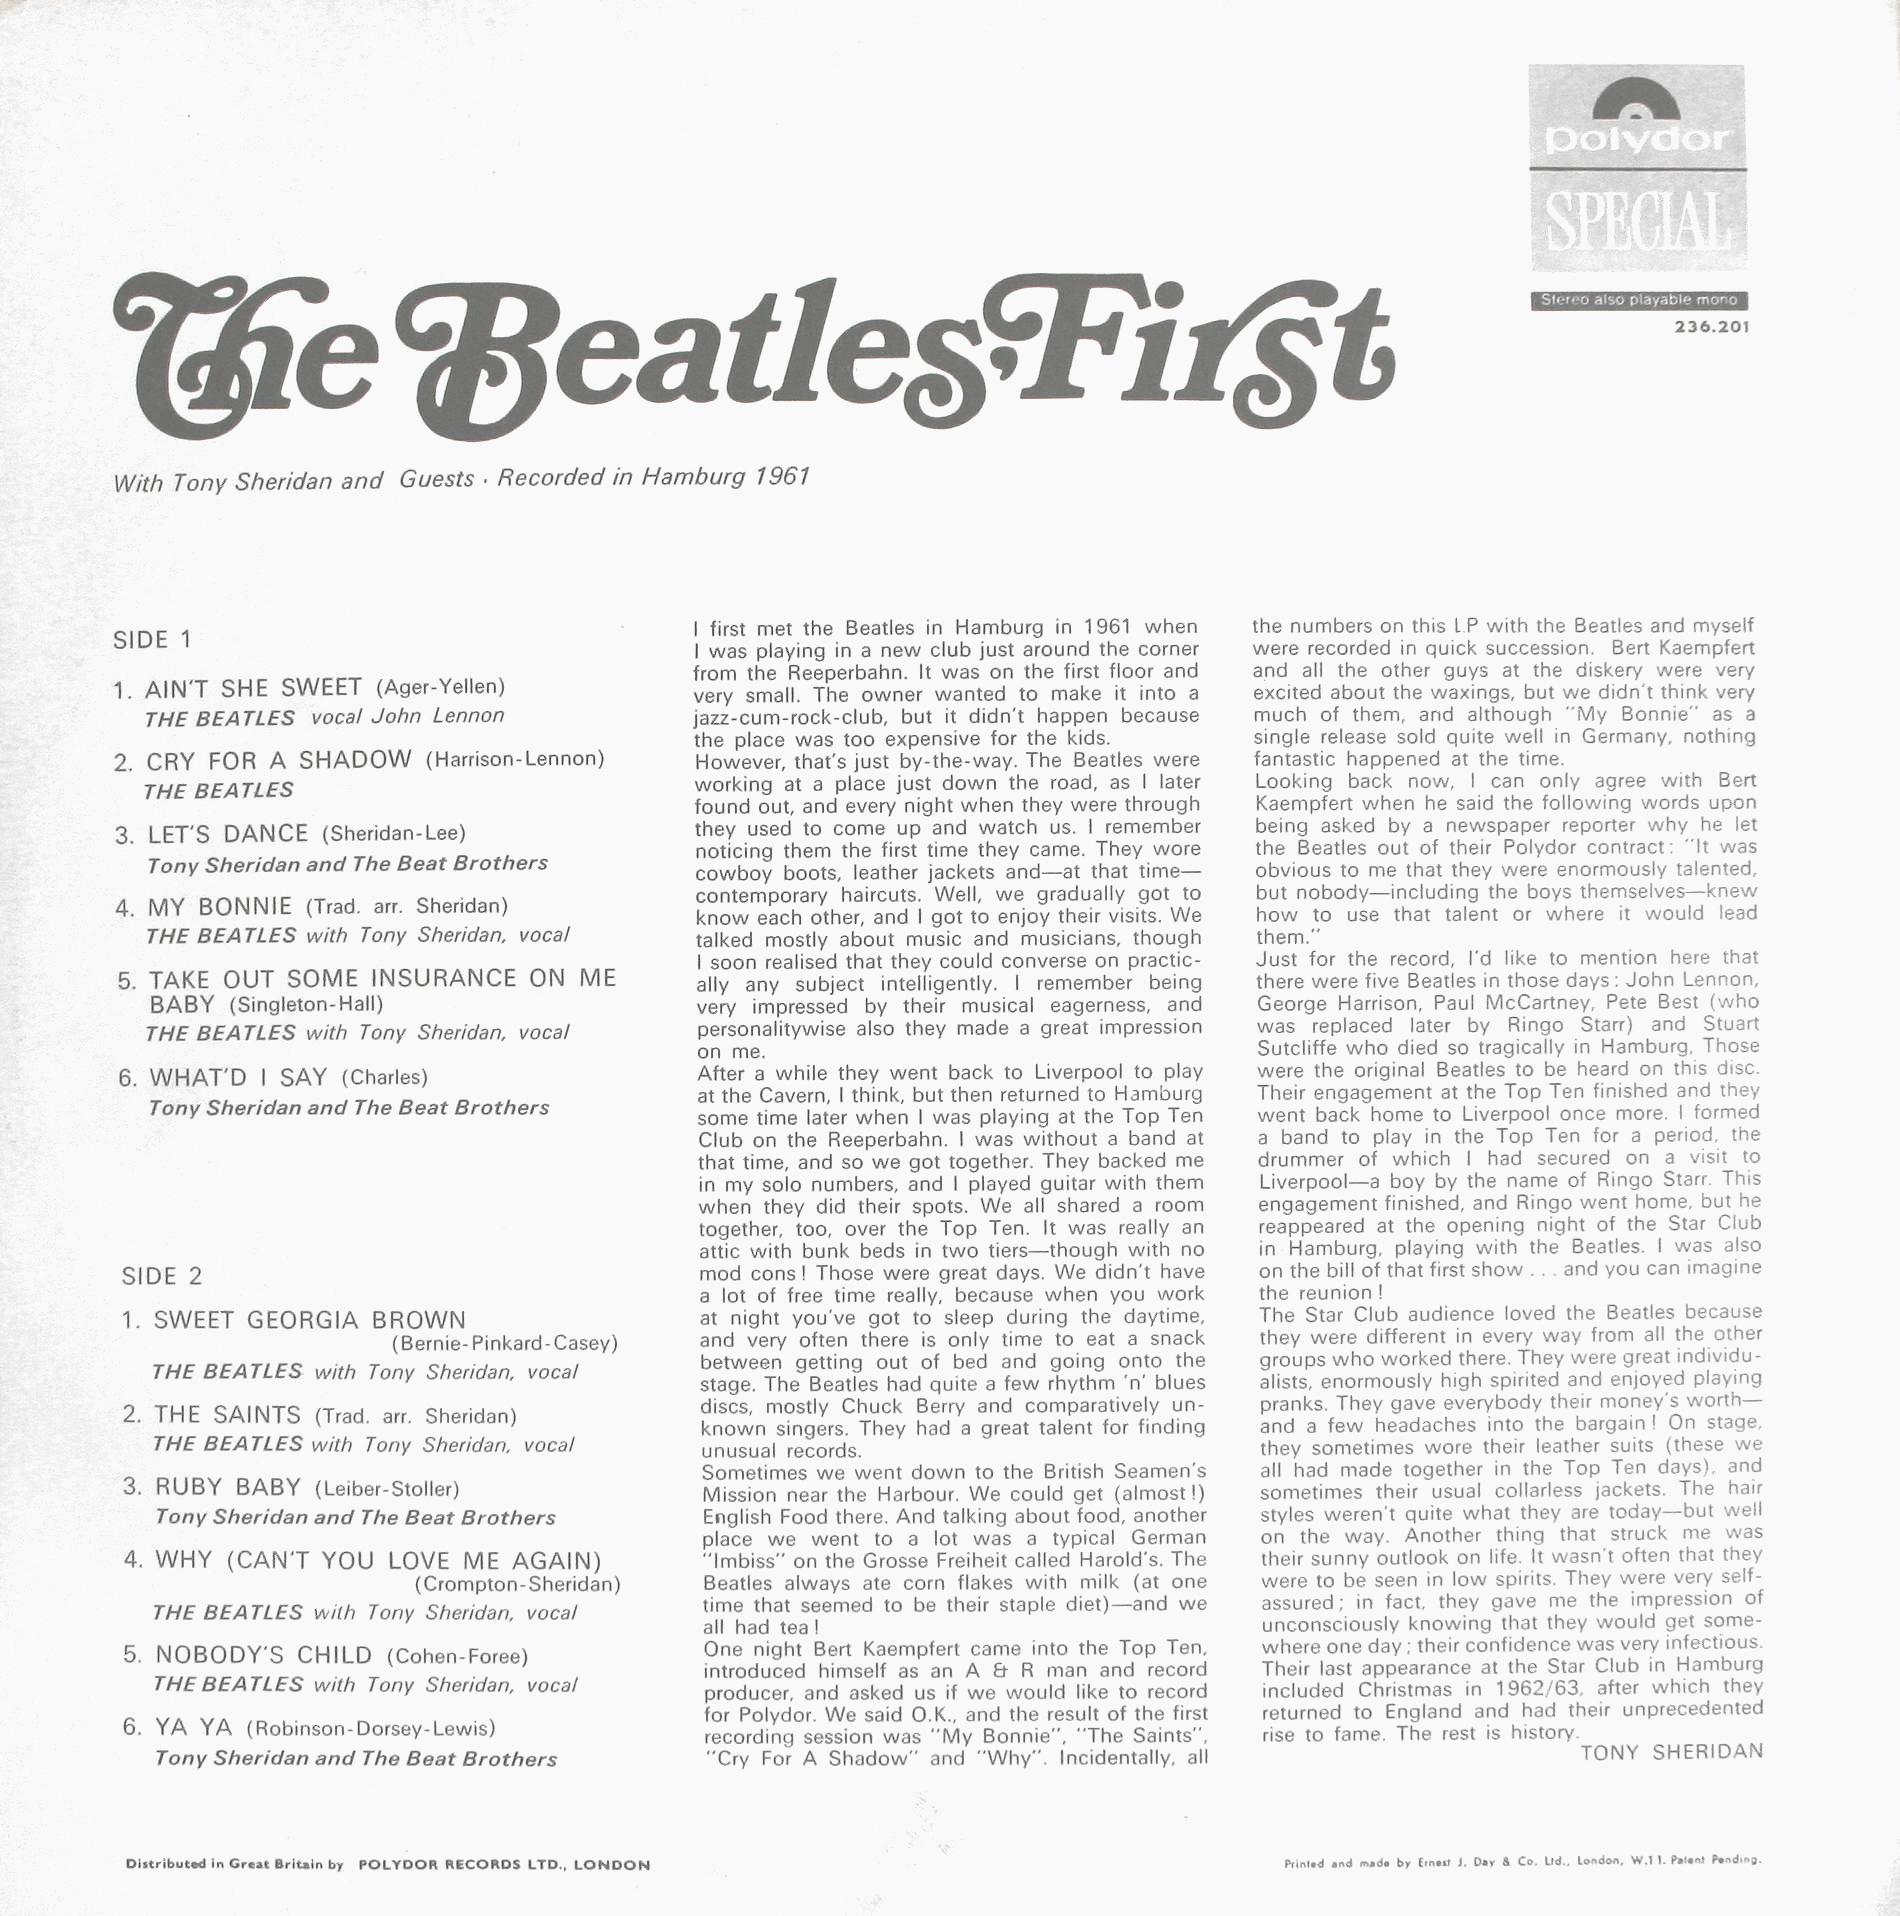 The Beatles Collection » The Beatles First, Polydor Special MCPS 